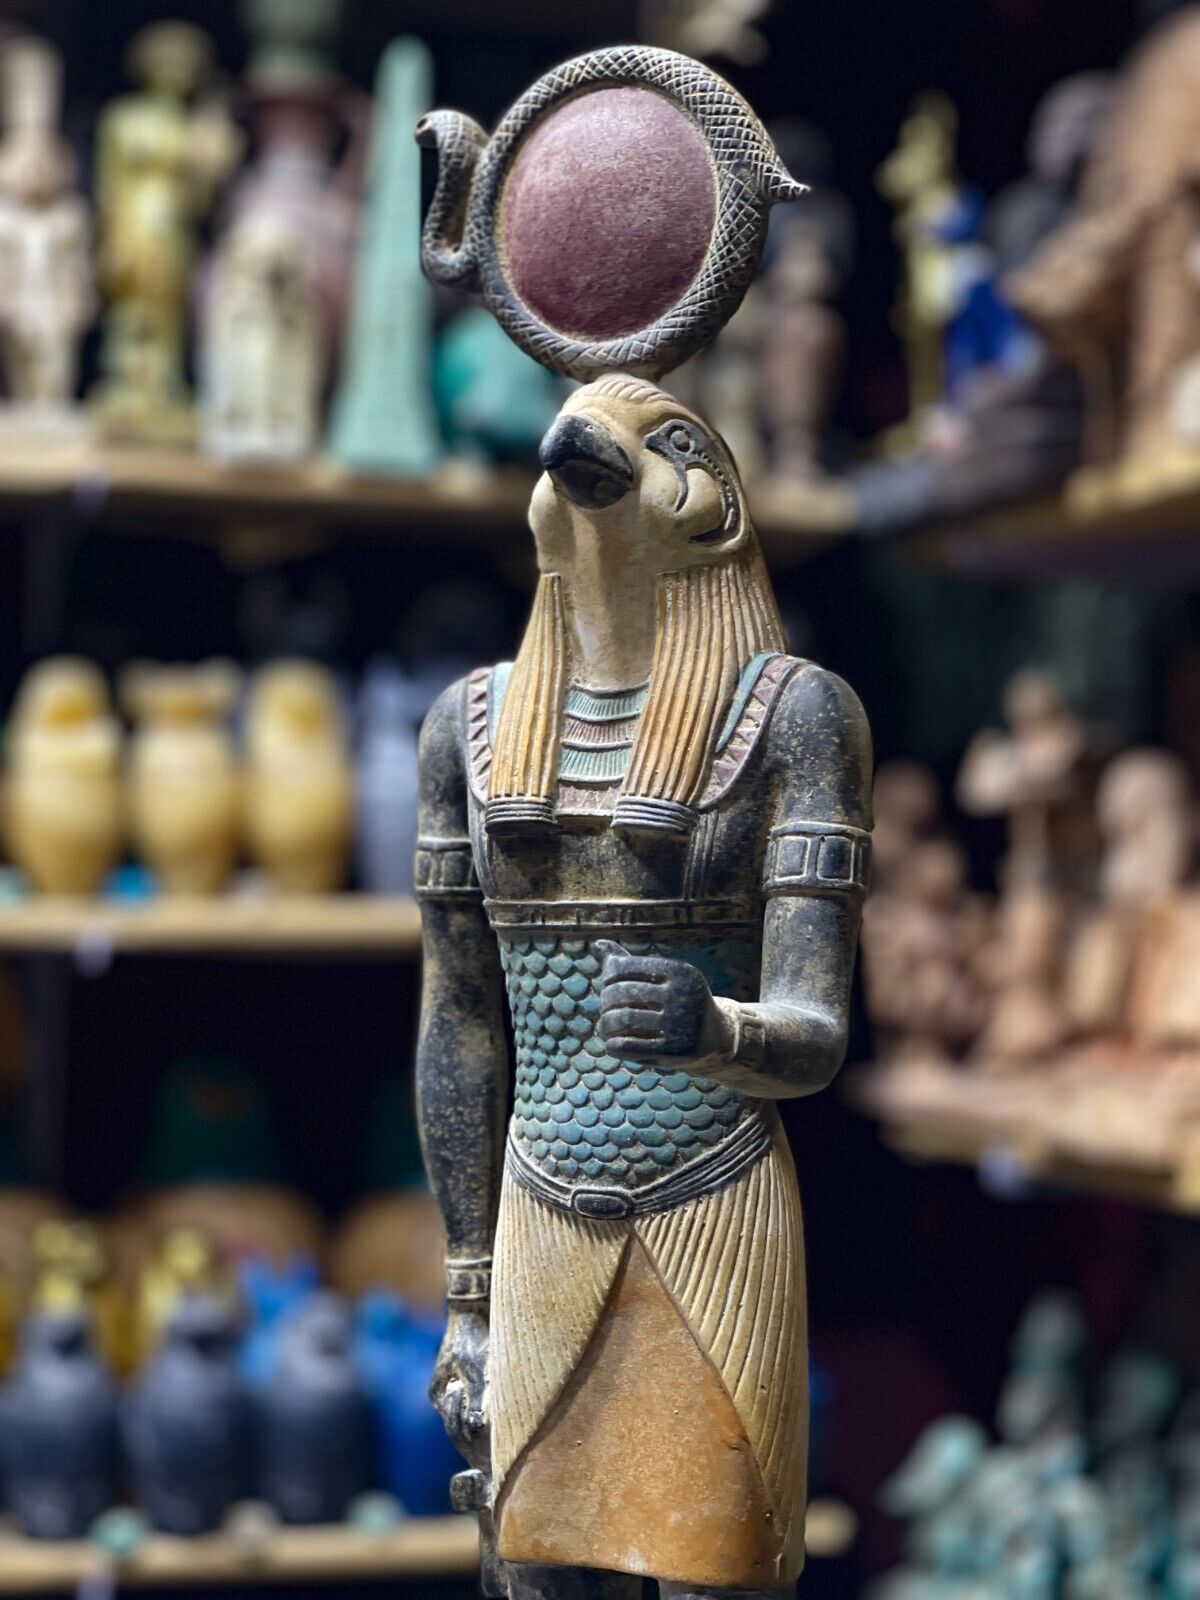 RA the god of sun wearing Sun disk with a falcon face - handmade in Egypt